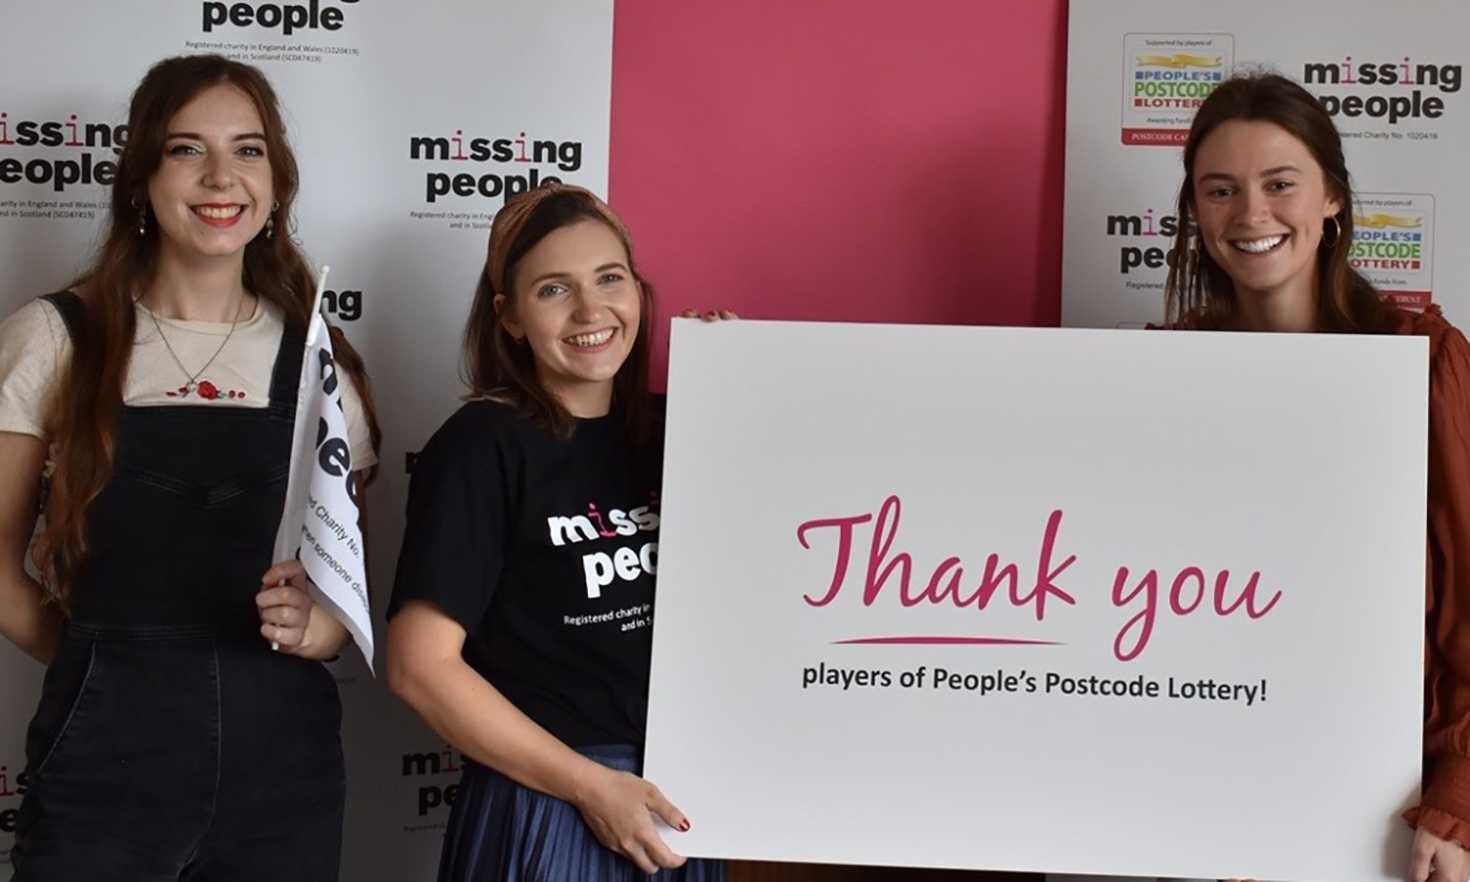 Missing People say thank you to players of People's Postcode Lottery